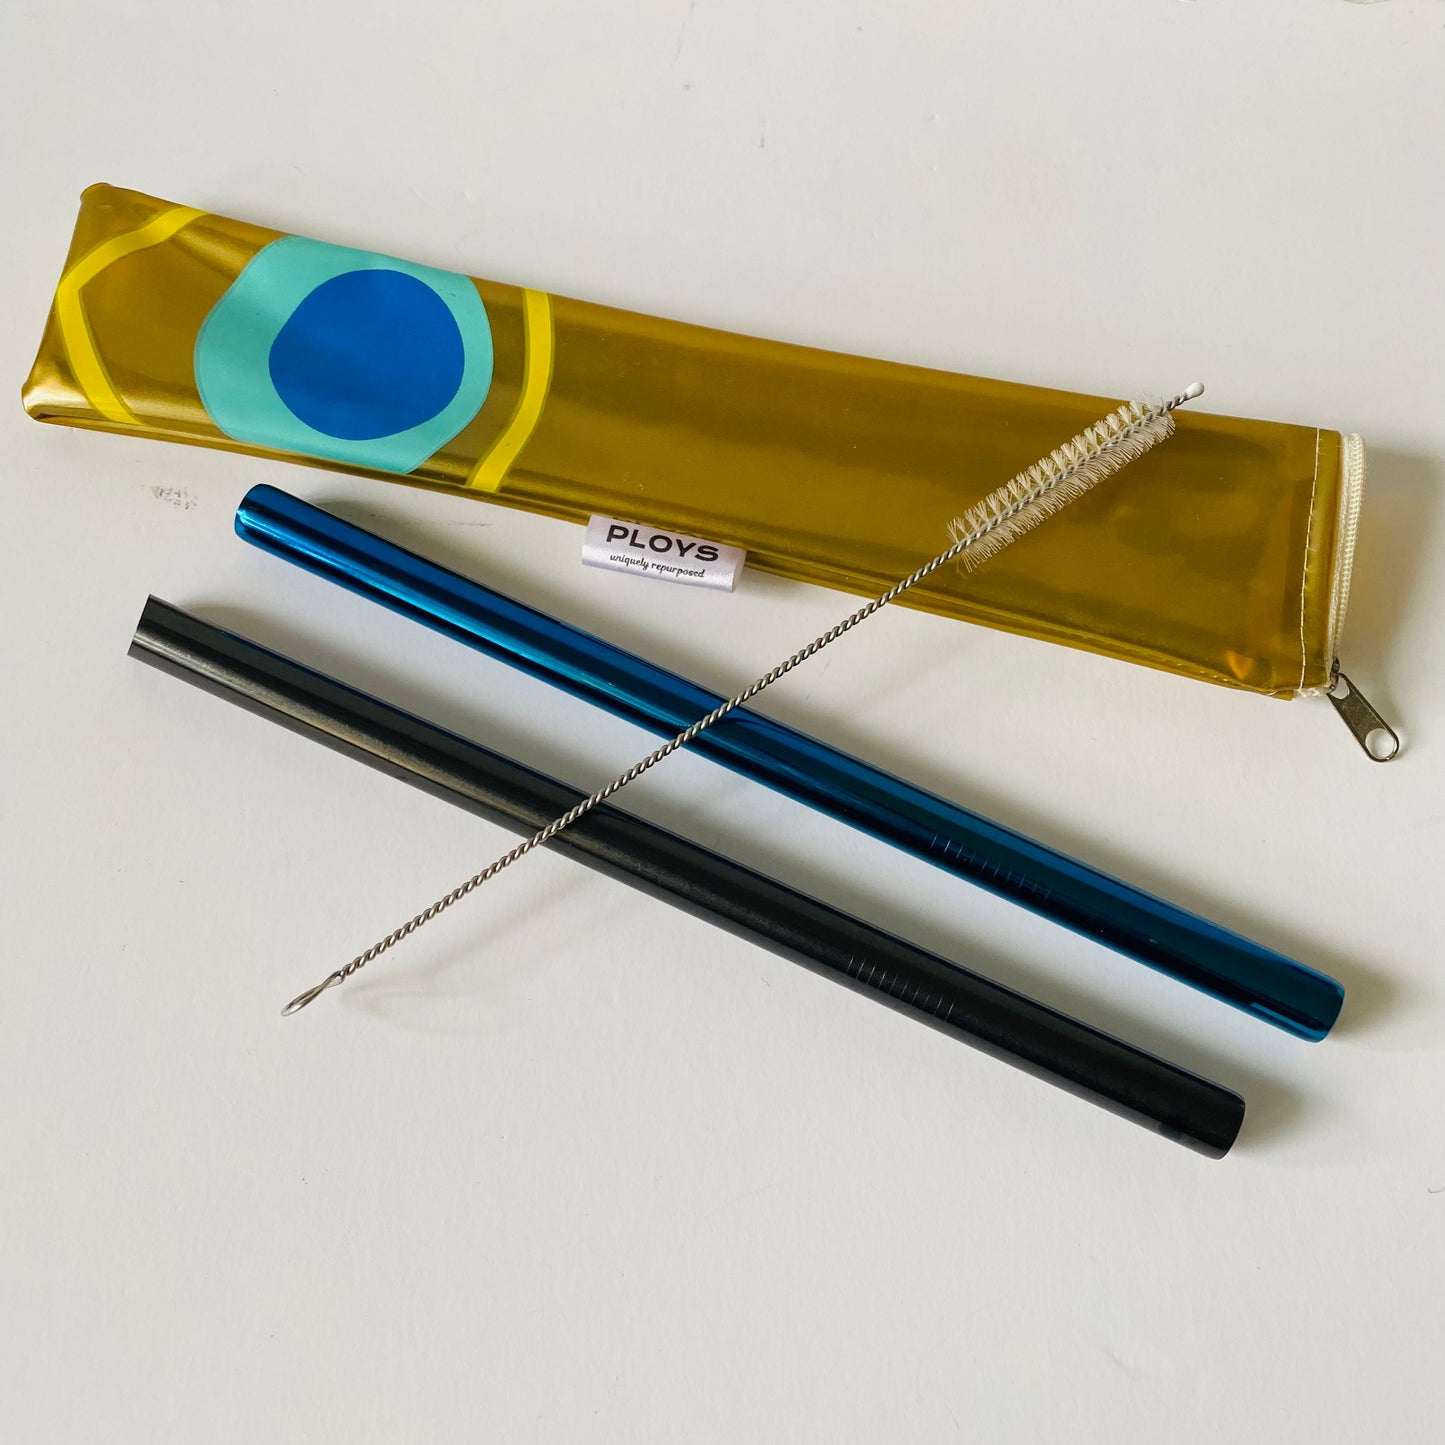 Reusable Straws Metal or Bamboo for use in Strawcases